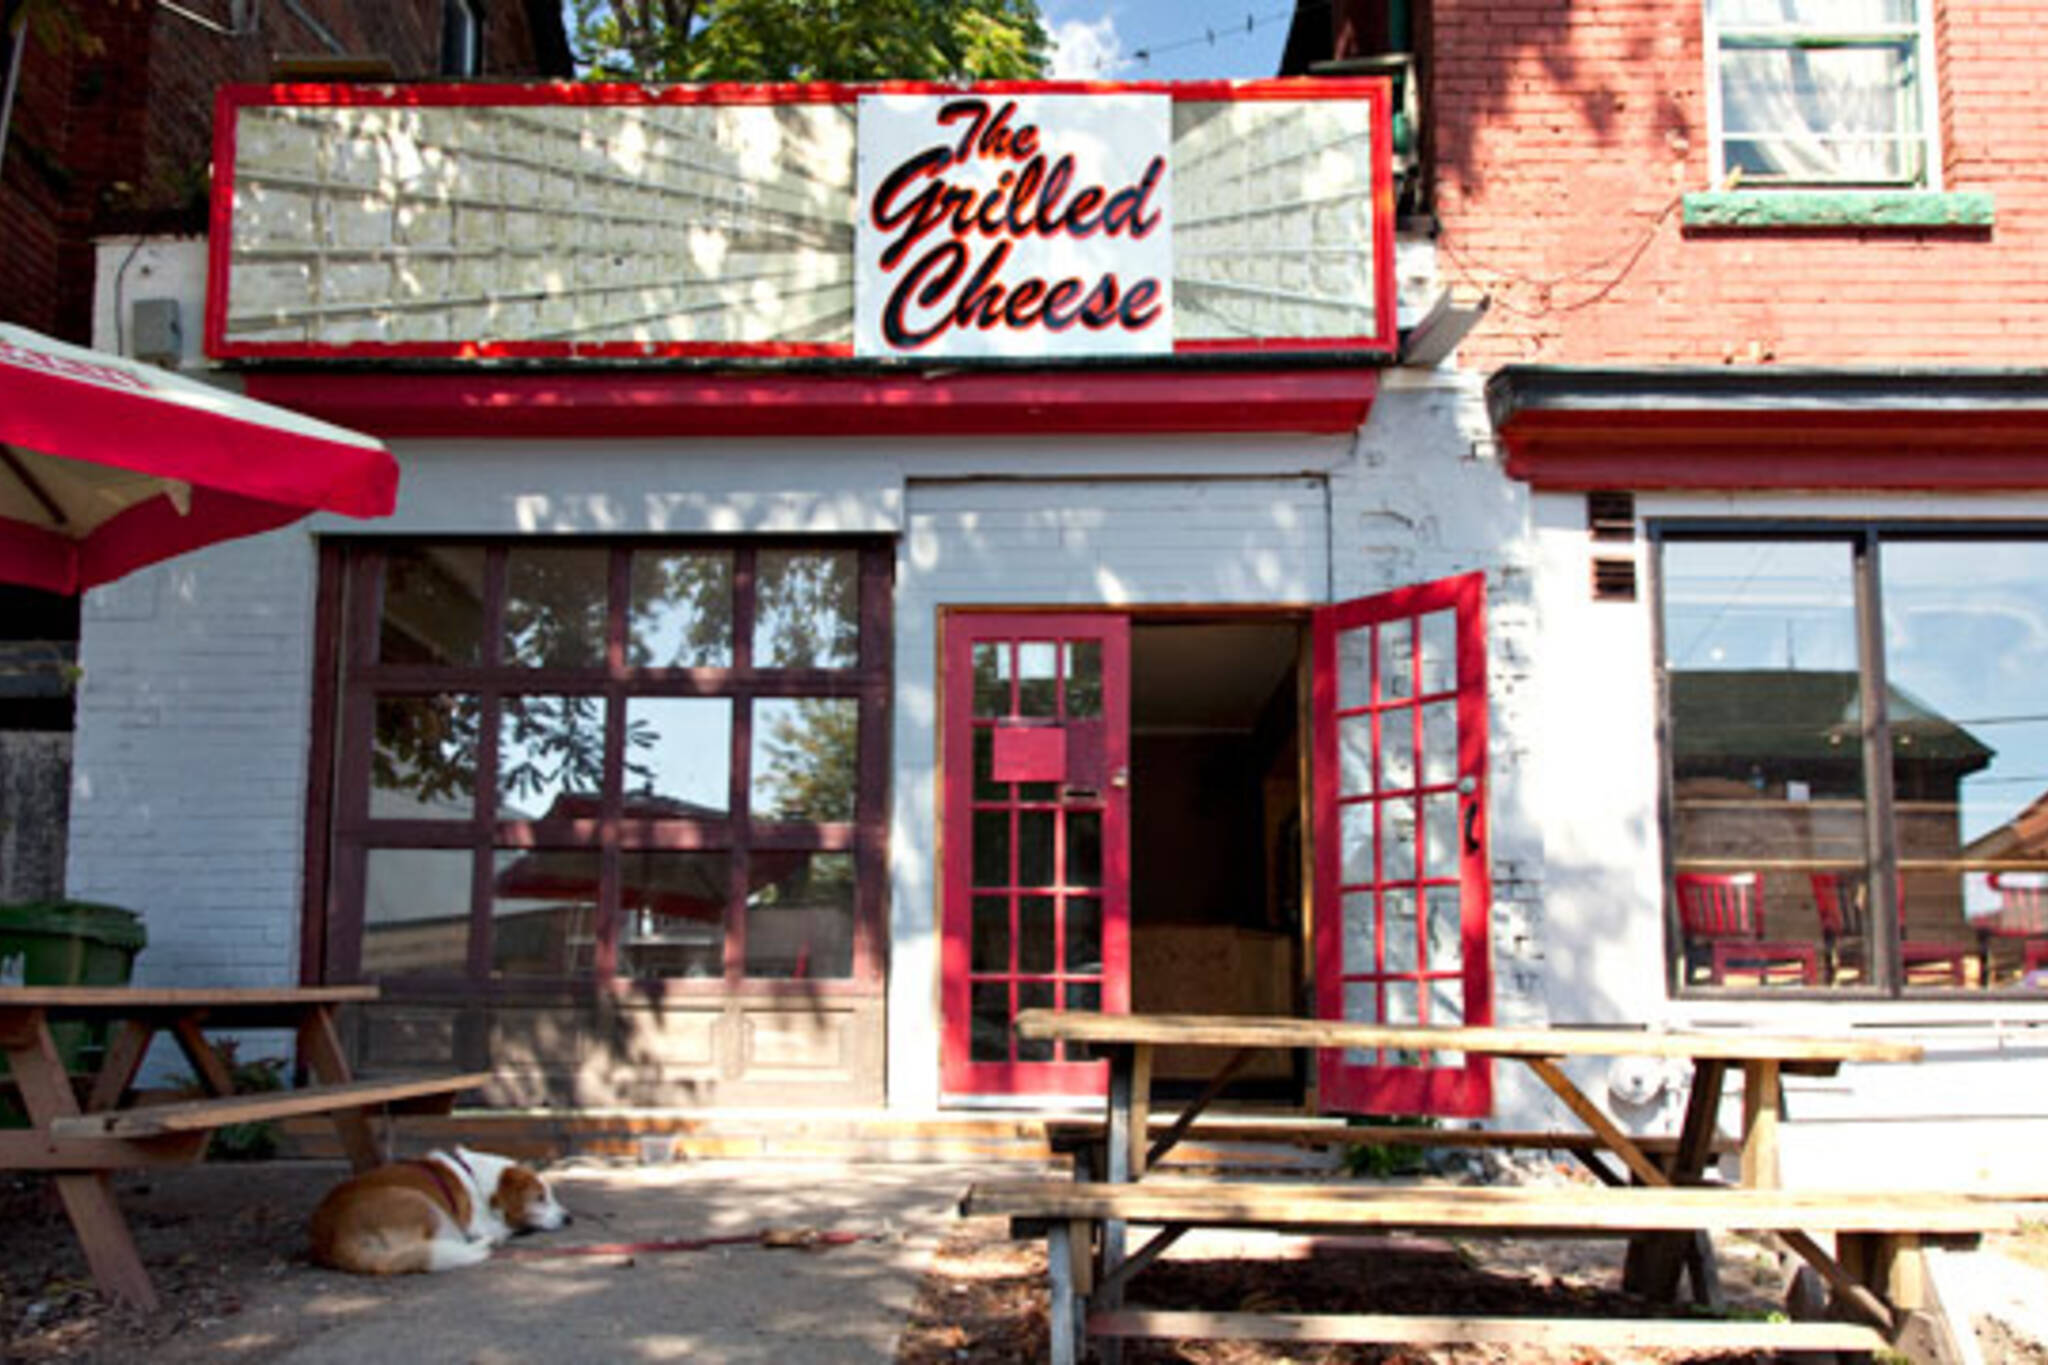 The Grilled Cheese shuts down as allegations run wild